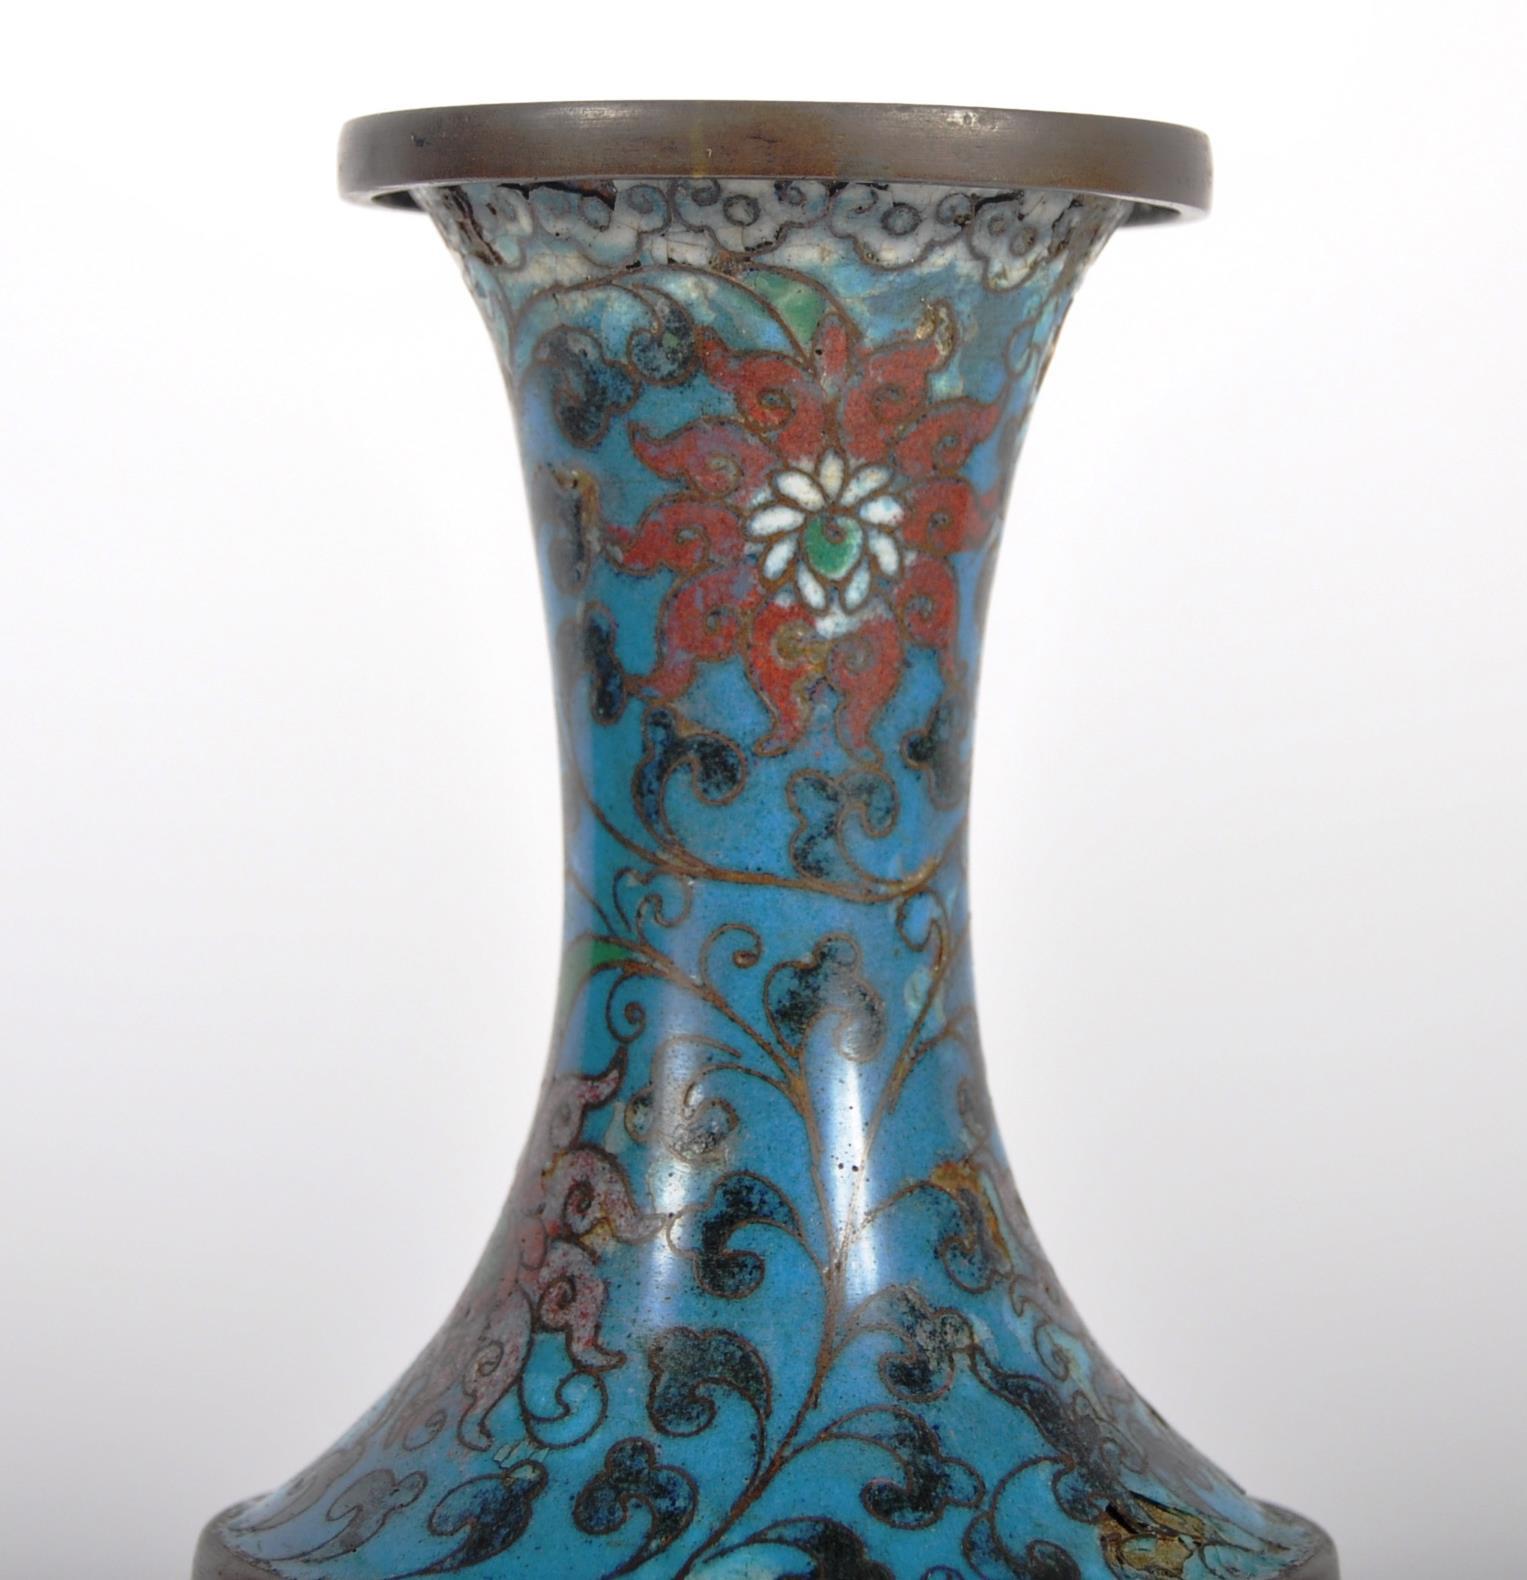 EARLY 20TH CENTURY CHINESE CLOISONNE VASE - Image 5 of 7